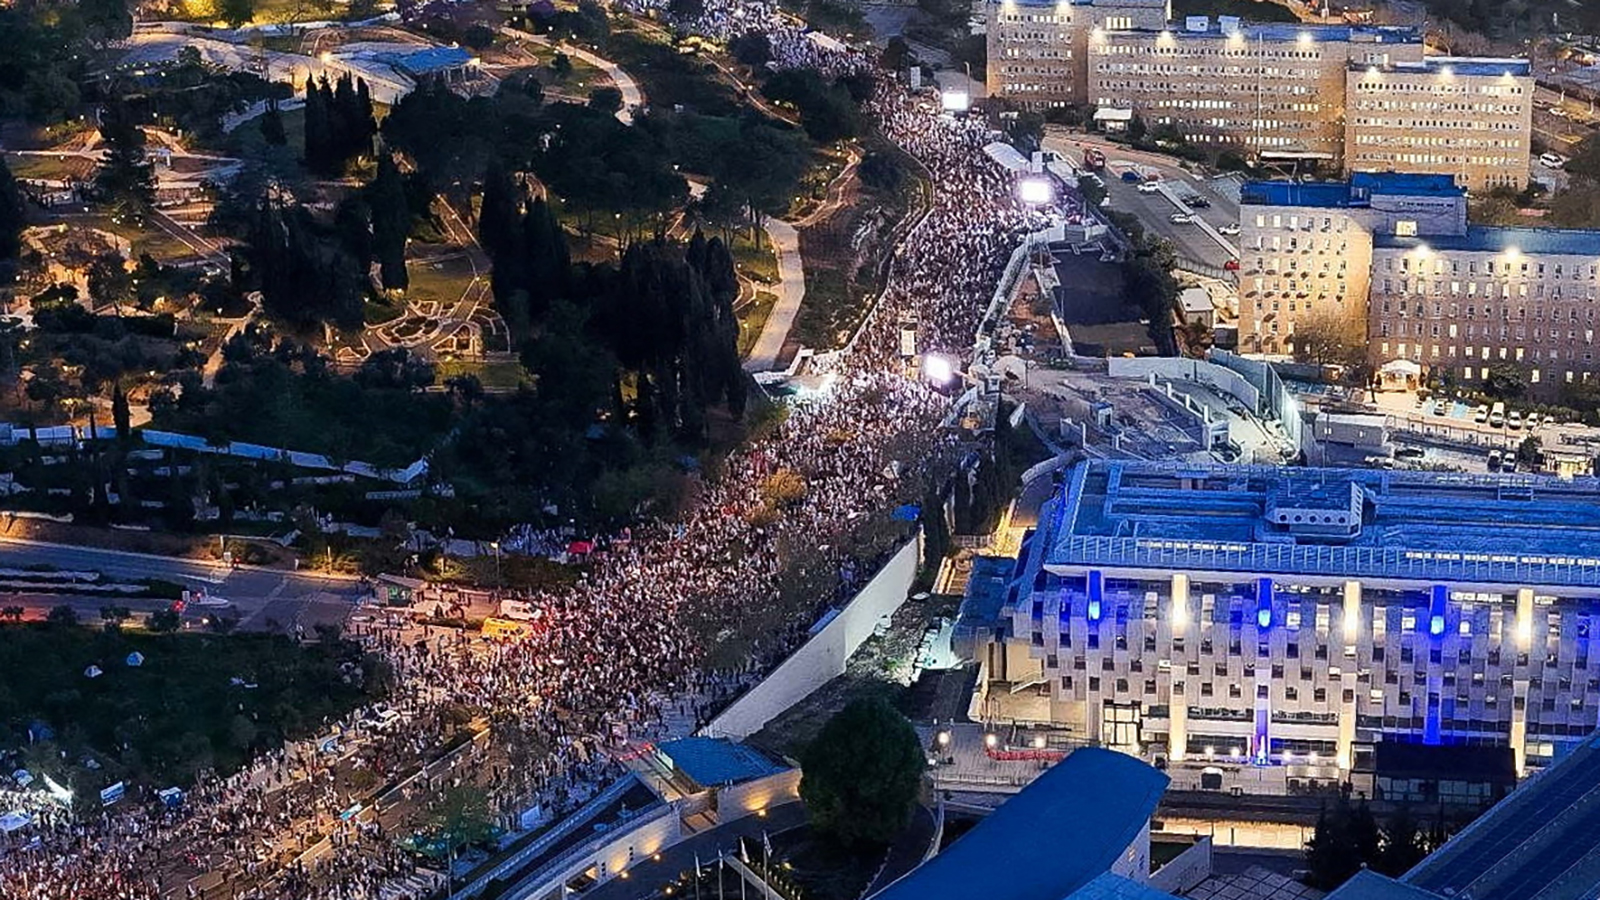 A drone view shows protesters calling for Israeli Prime Minister Benjamin Netanyahu's government to resign, near the Knesset, Israel’s parliament, in Jerusalem on March 31.